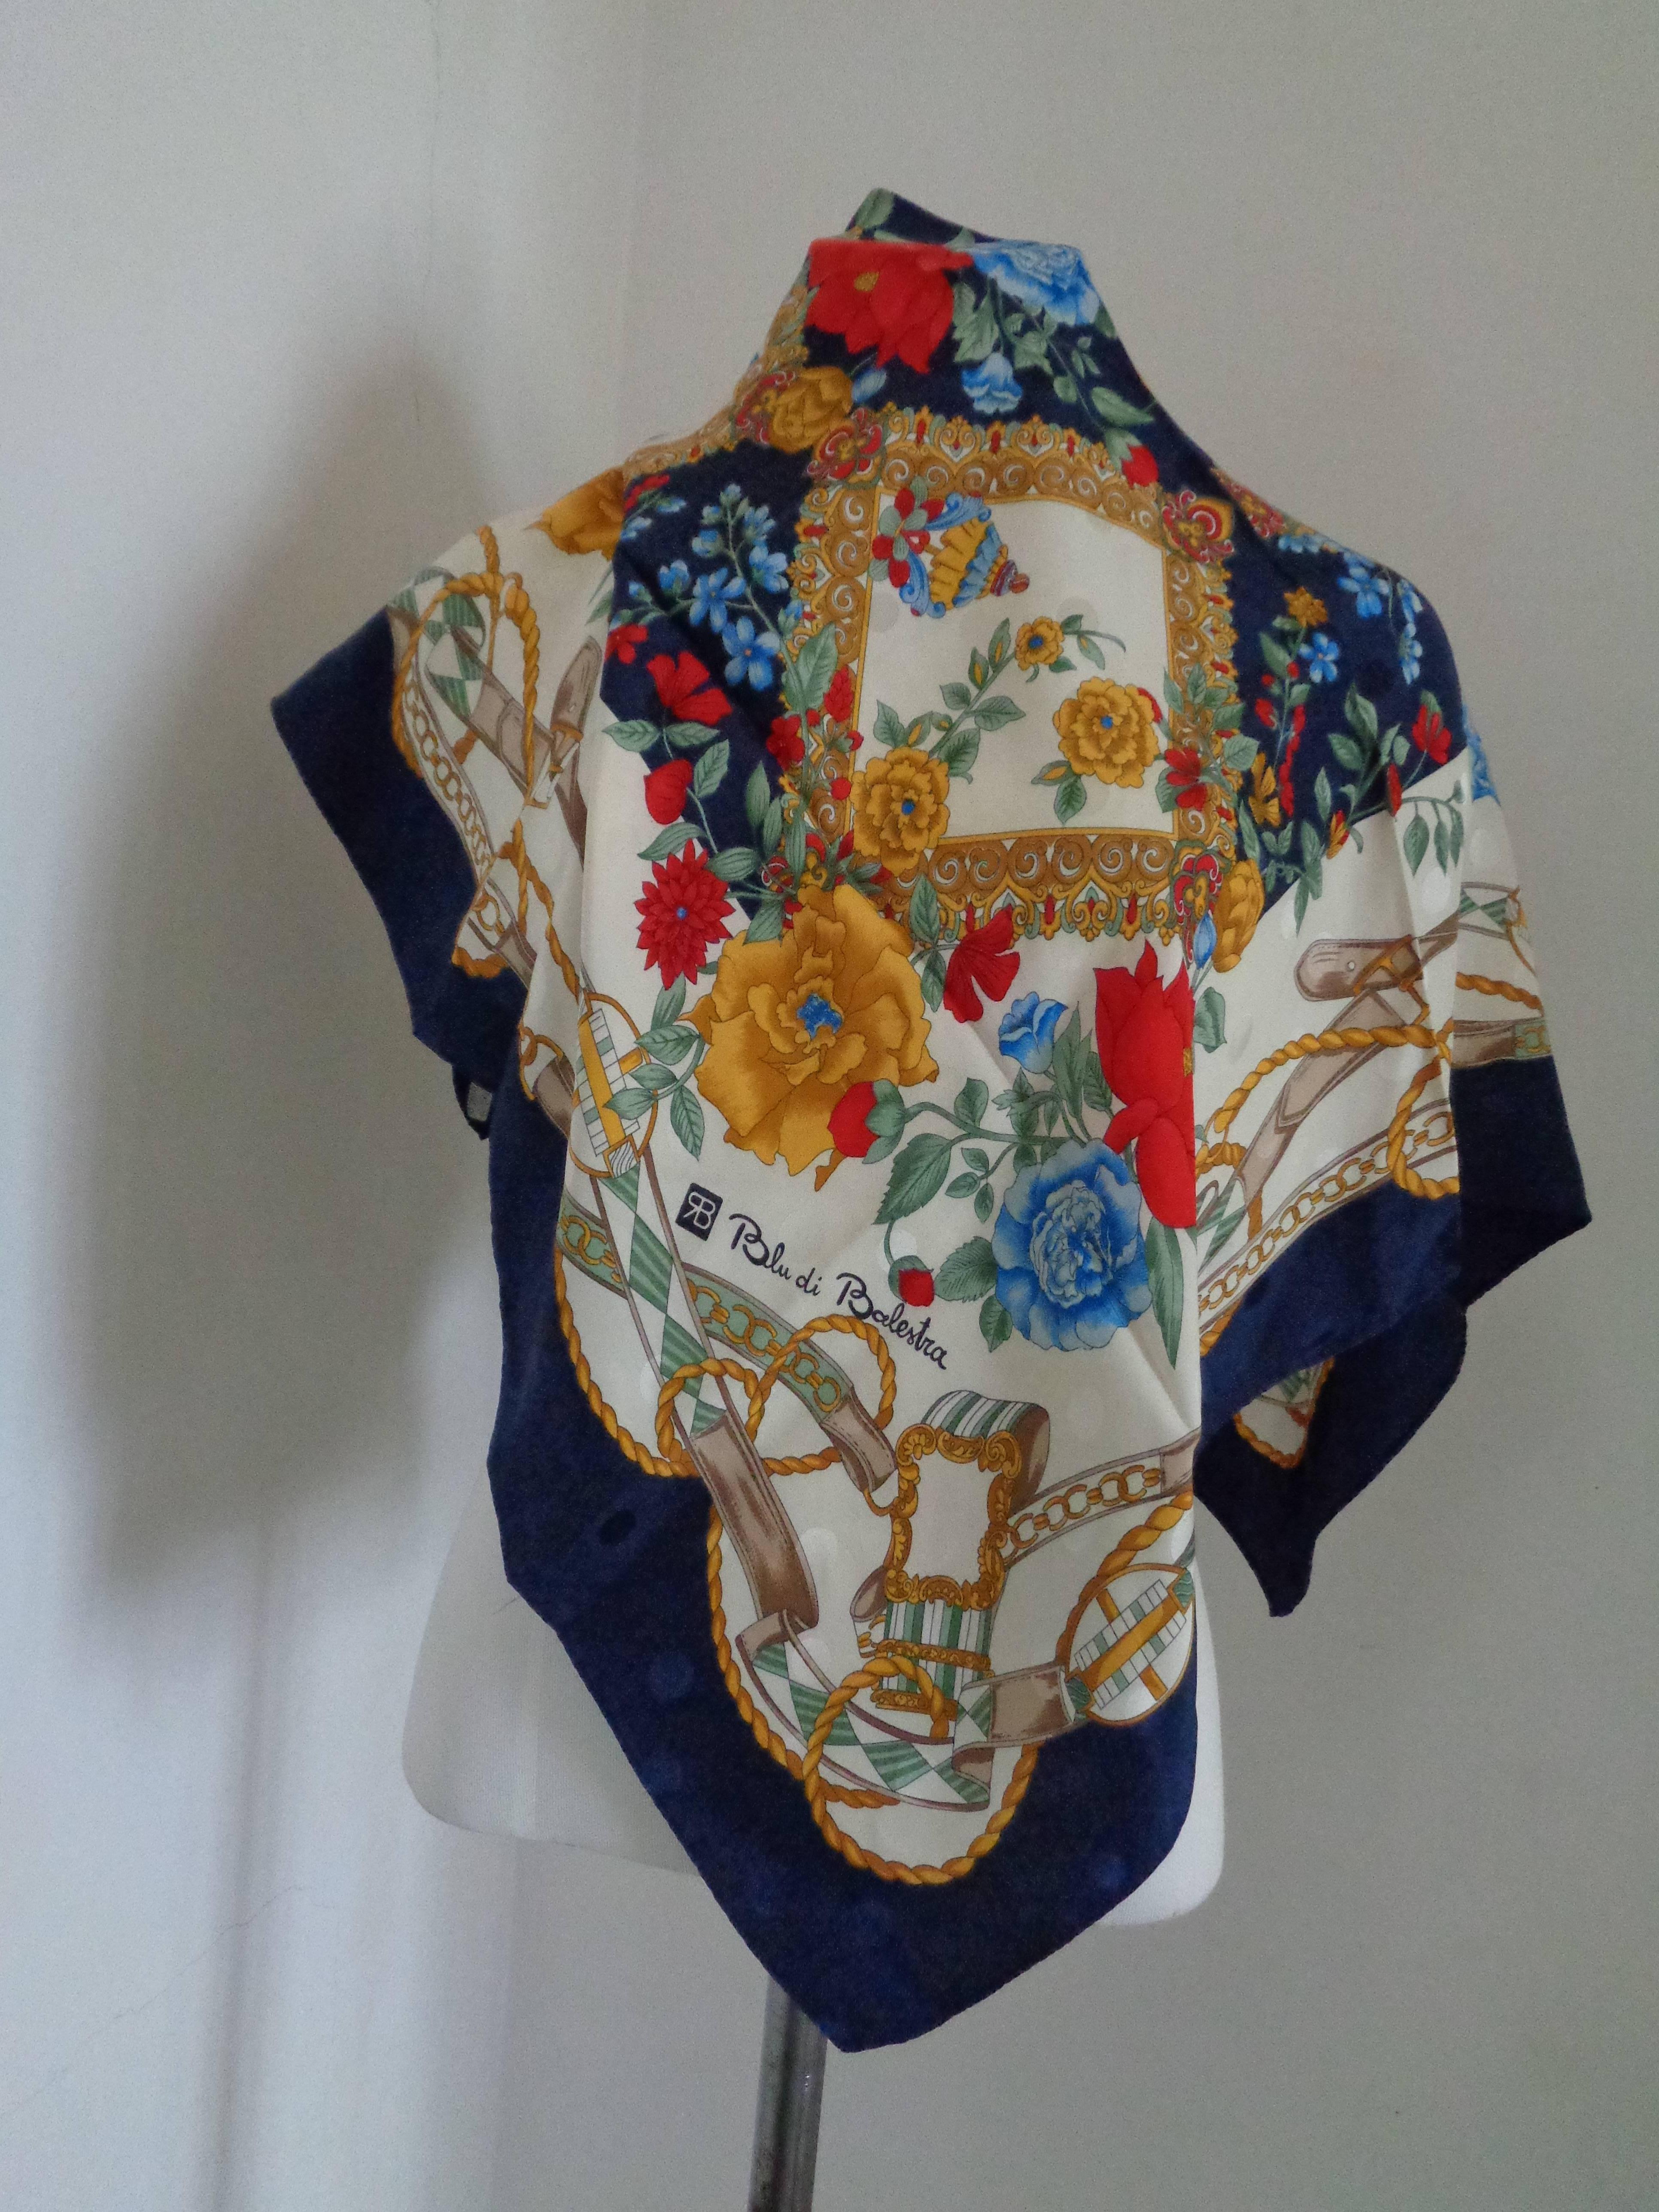 Blu by Renato Balestra multicoloured silk Scarf

Embellished with flower prints all over

Measurements 88 x 88 cm